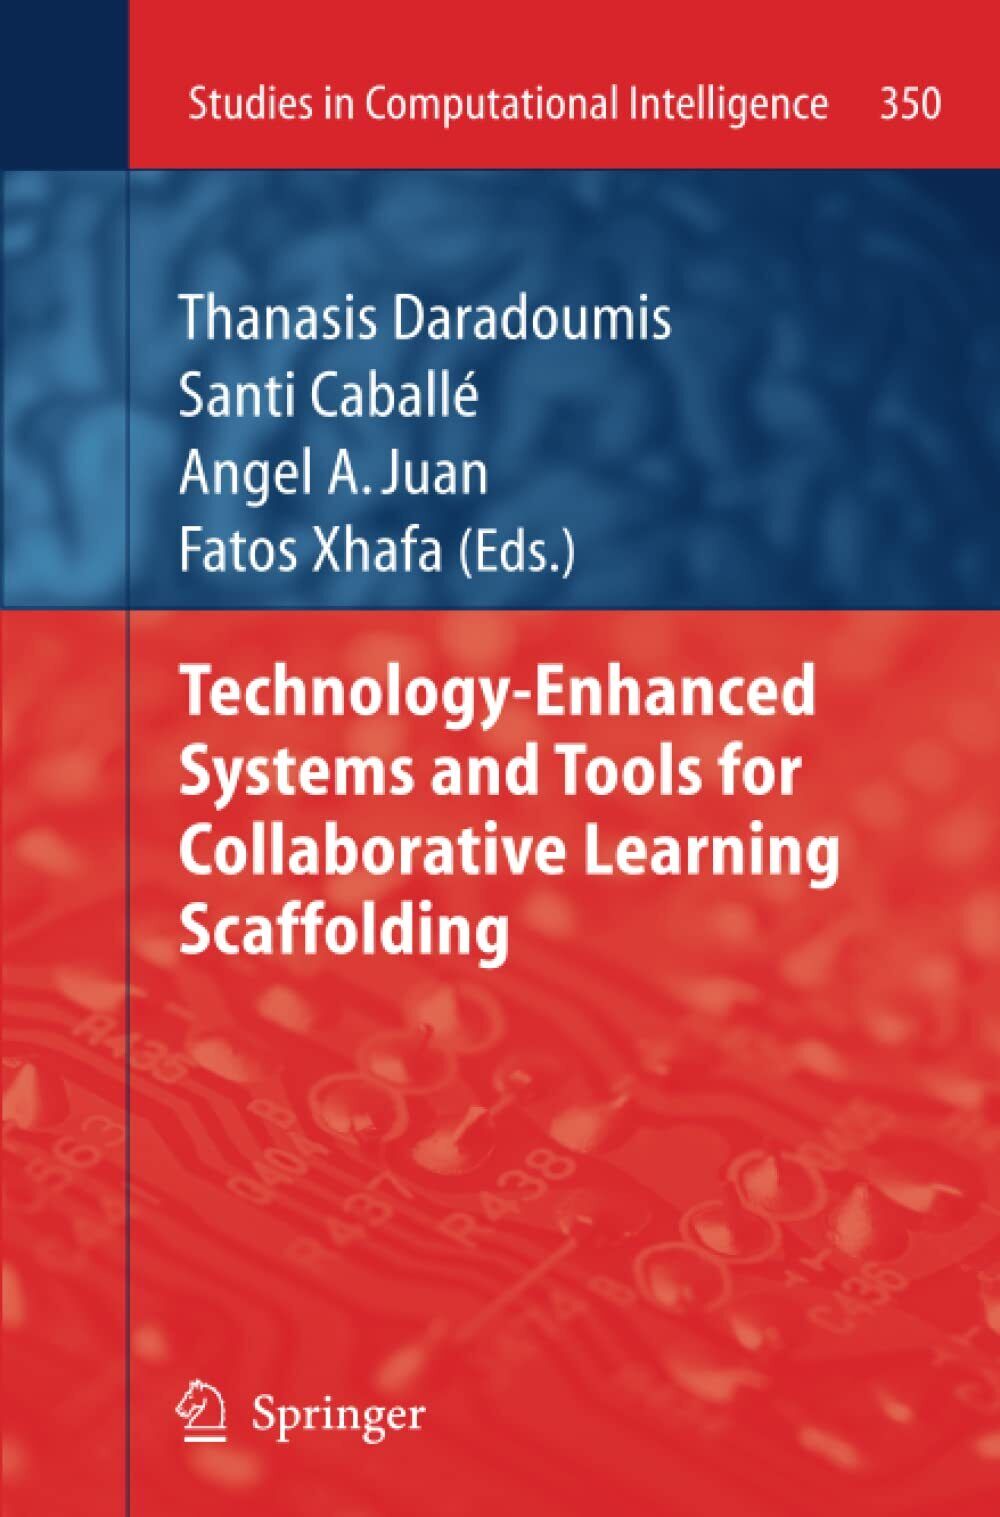 Technology-Enhanced Systems and Tools for Collaborative Learning Scaffolding libro usato